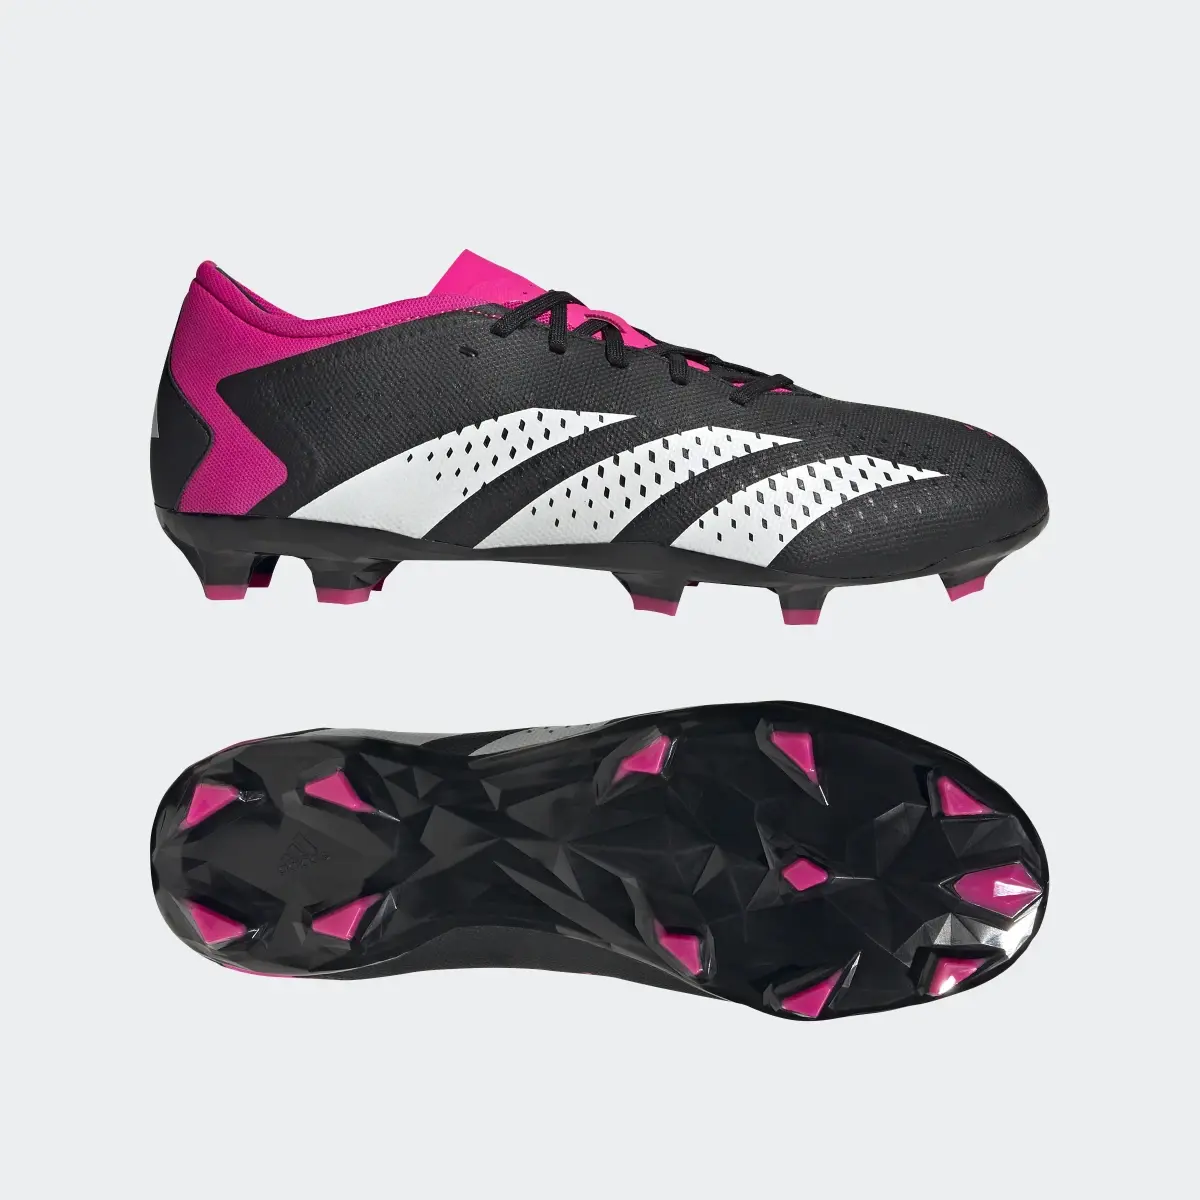 Adidas Predator Accuracy.3 Low Firm Ground Boots. 1